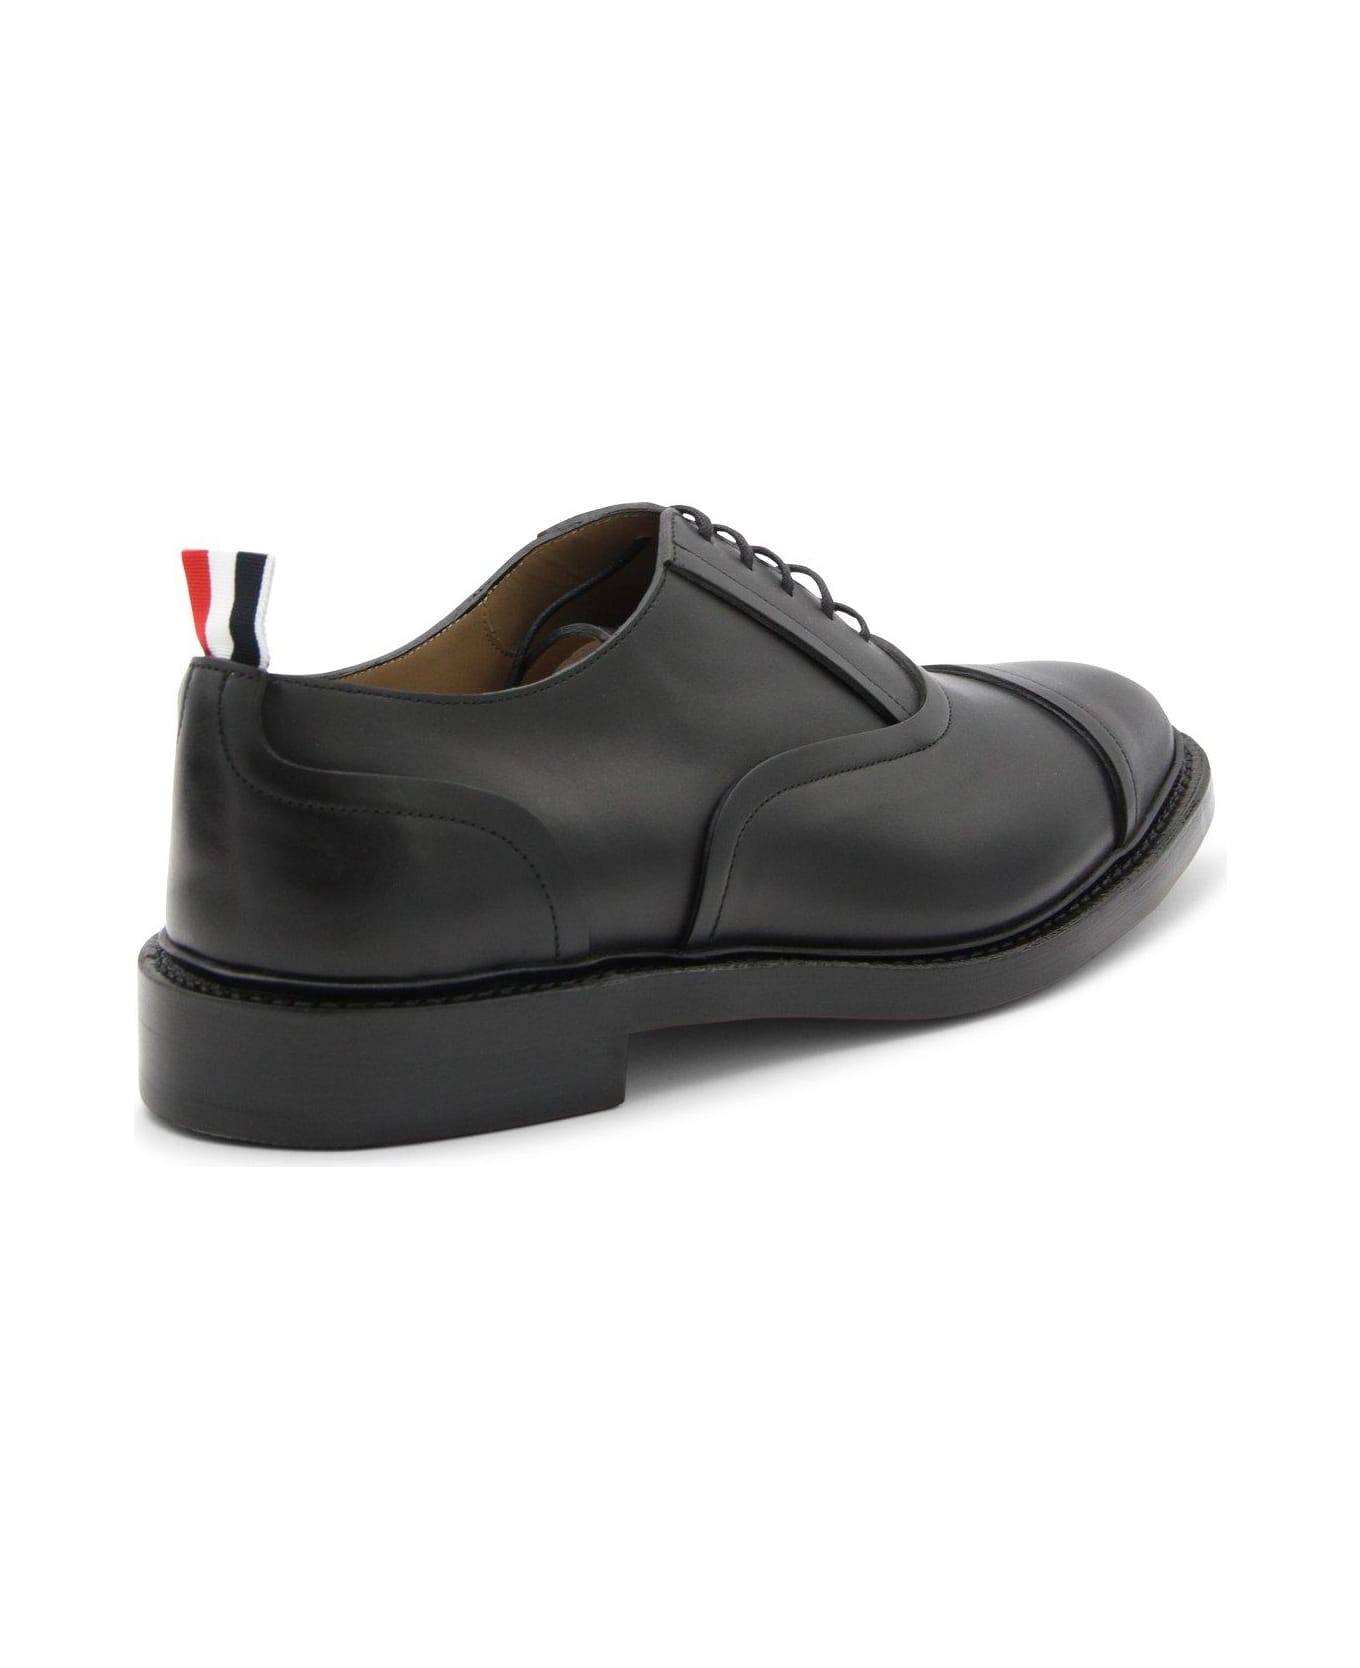 Thom Browne Lace-up Loafers - Black